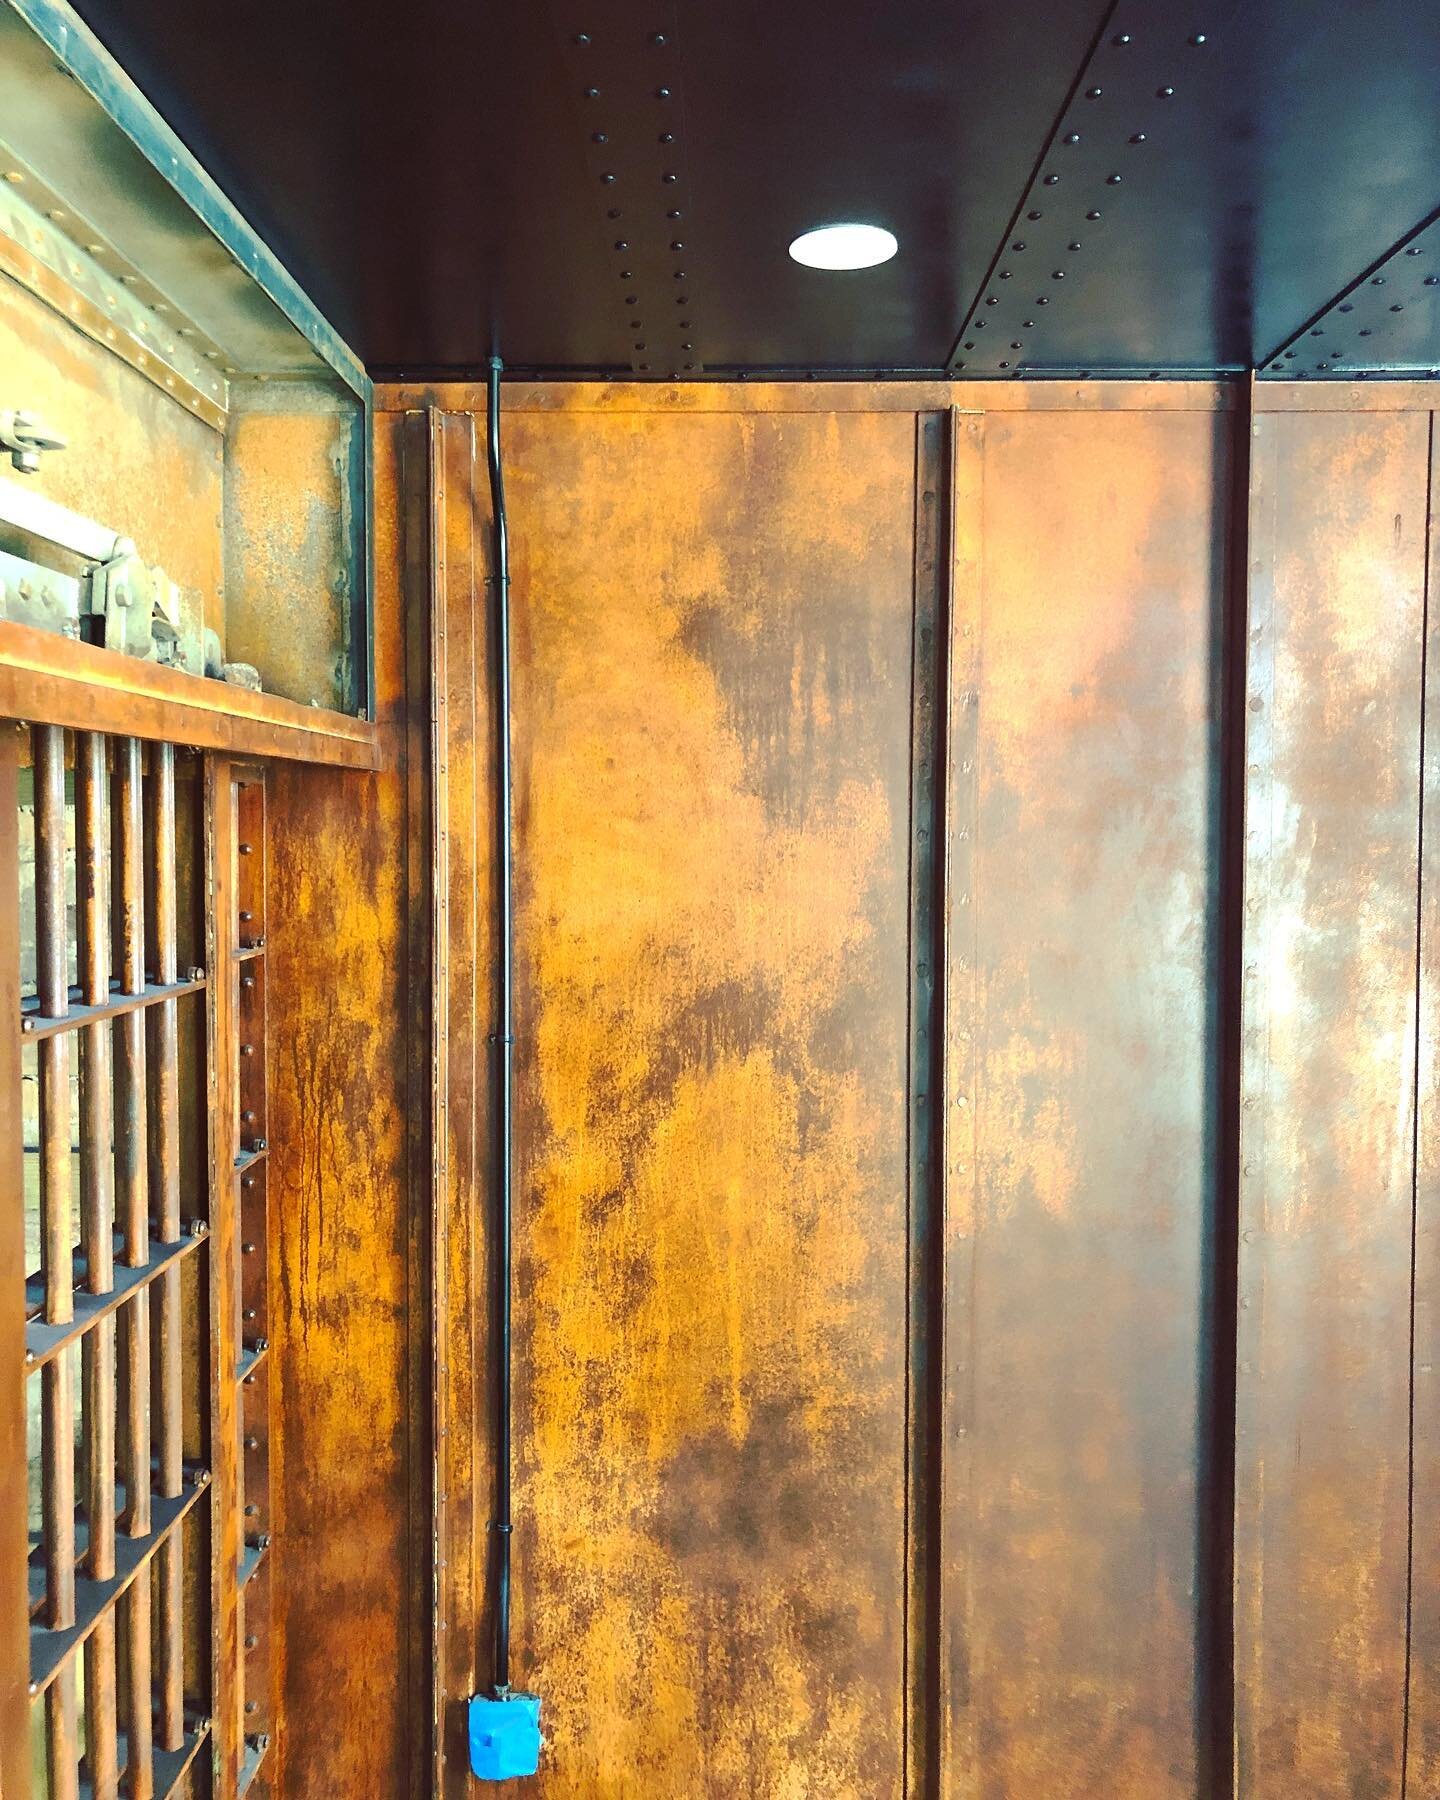 This week I&rsquo;ve been working on the @oldmarshalljail finishing out the metal walls with rust patina. 
This image doesn&rsquo;t really do the surface justice, but it comes close. 
I&rsquo;m in love with it, partly because it feels very much like 